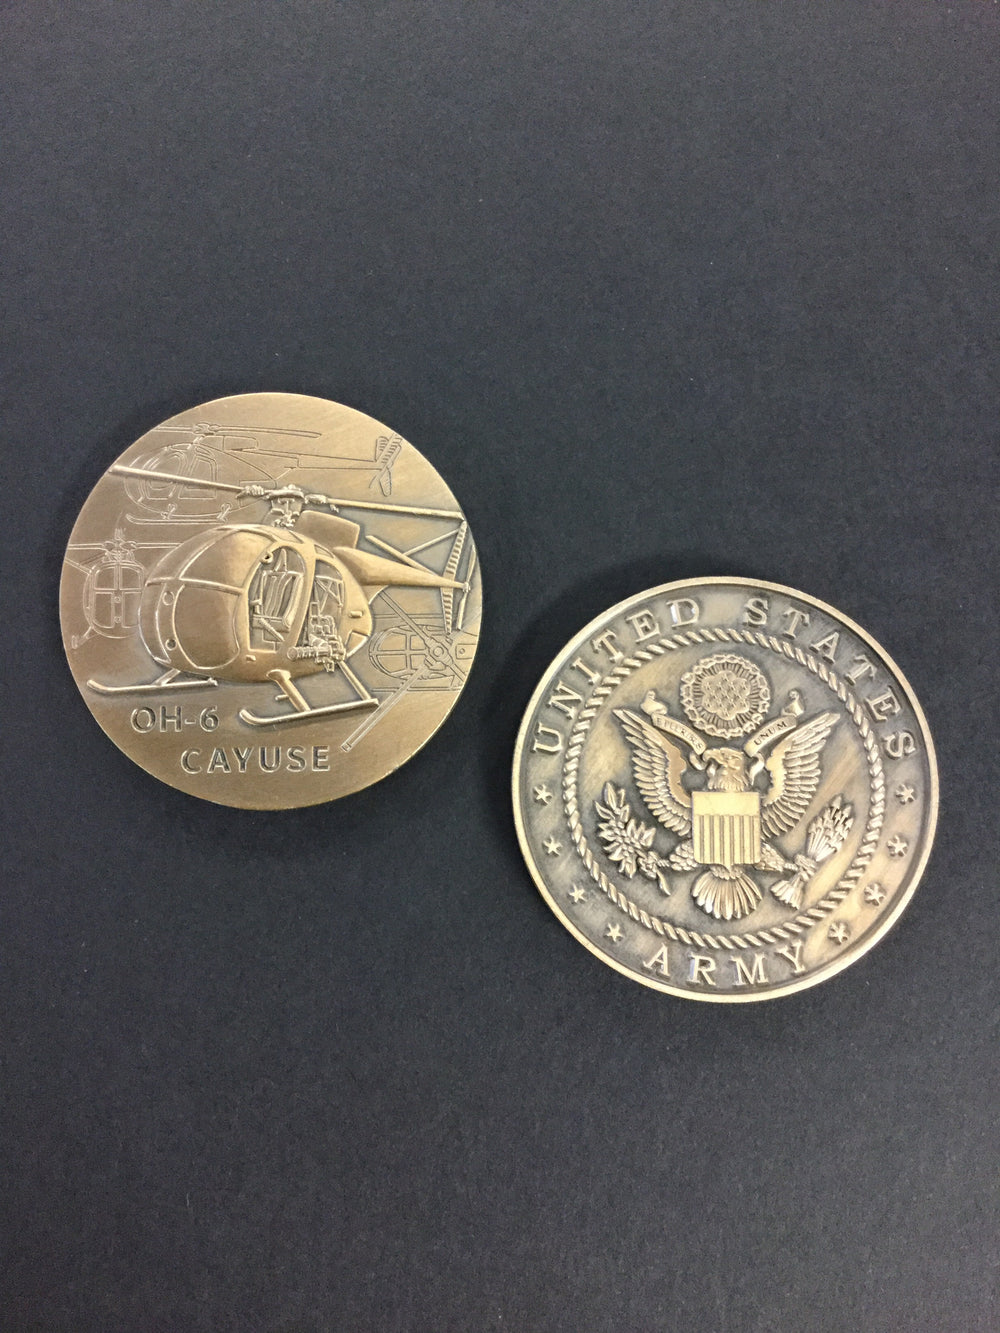 OH-6 Cayuse Helicopter Coin